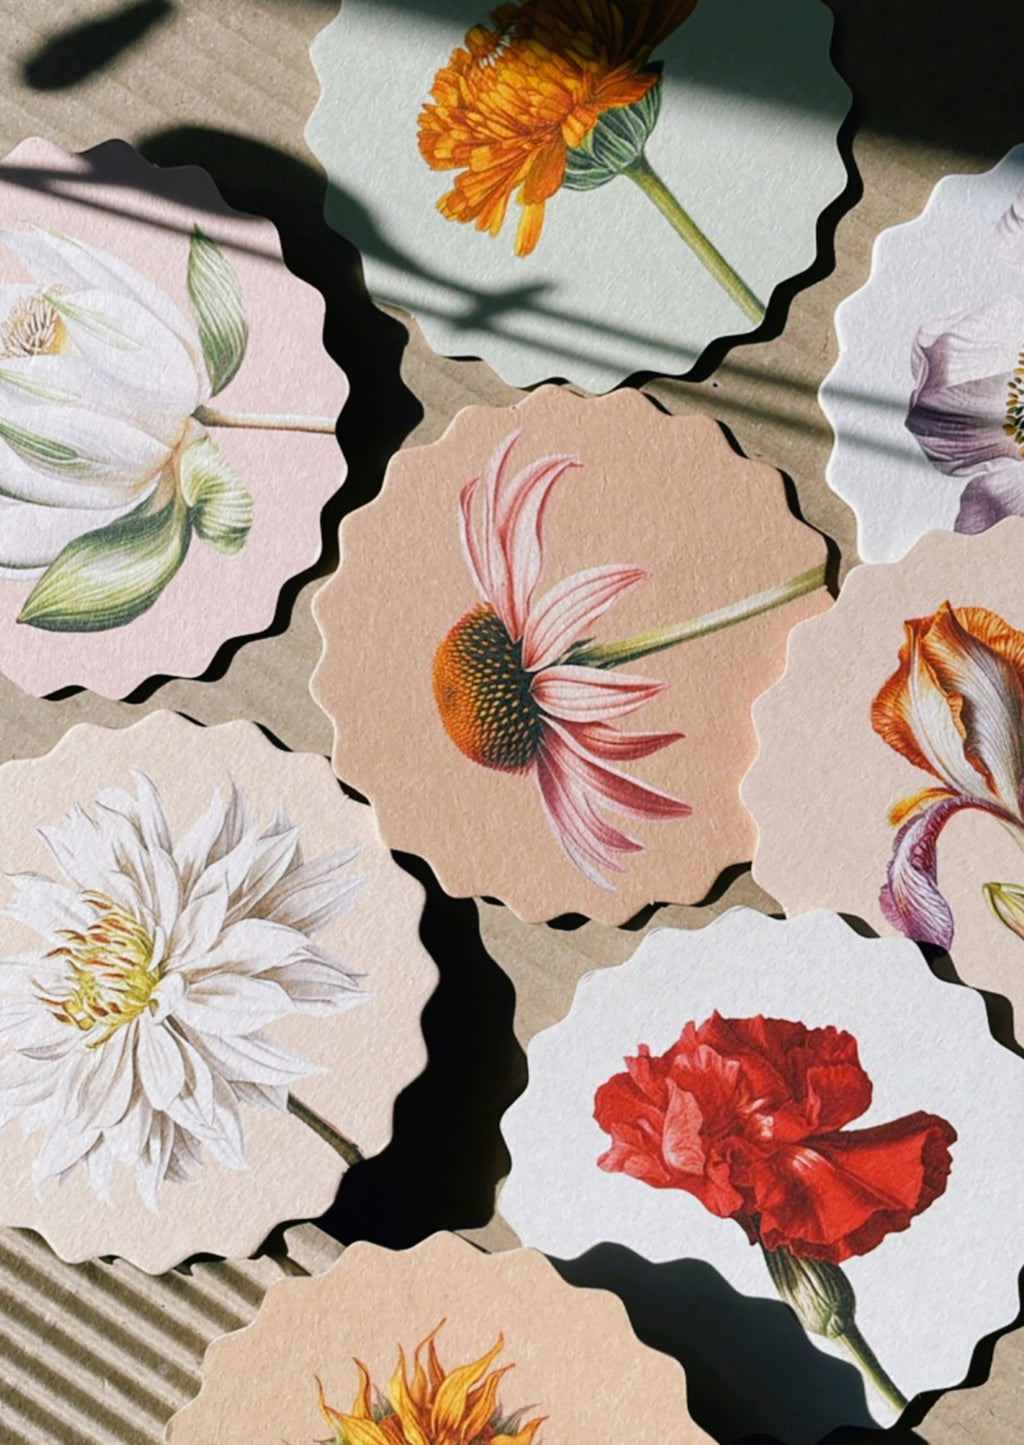 Flowers: A set of scalloped edge paper coasters with 10 different flower prints.